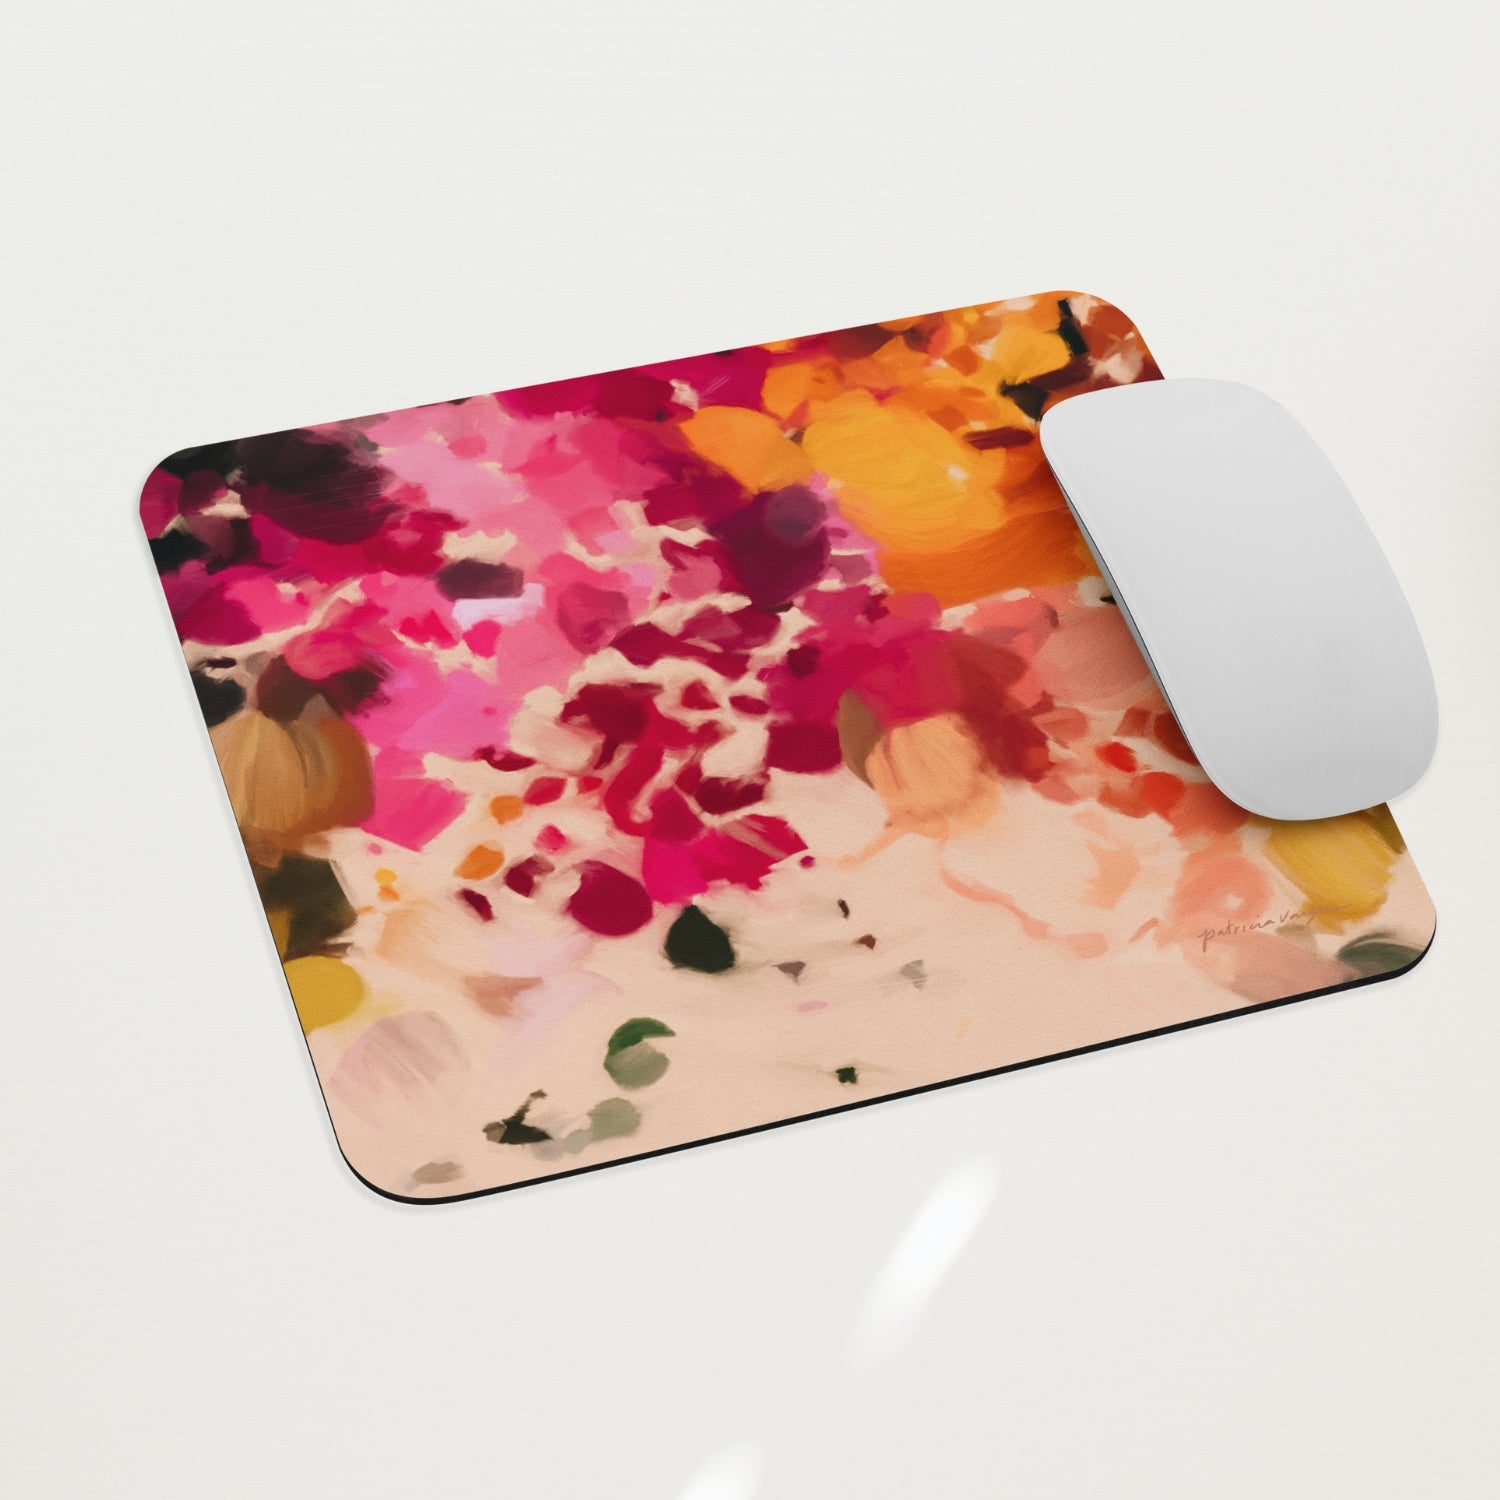 Bougainvillea, pink orange, bright colorful mouse pad featuring abstract art by Parima Studio